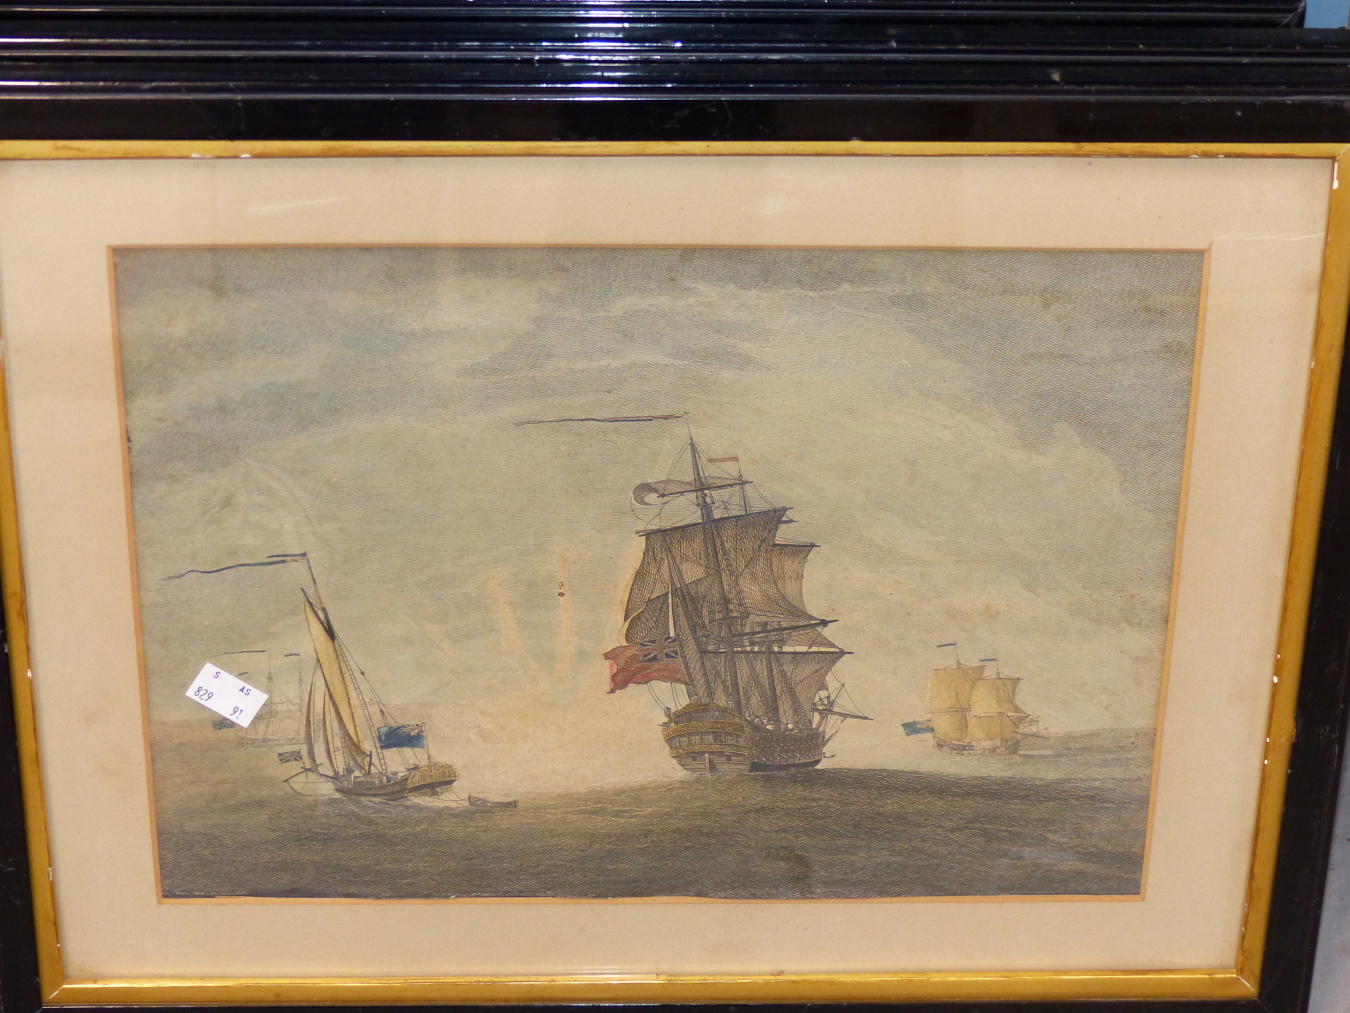 AFTER PETER MORNAY 1681-1749. 4 BRITISH MARITIME SCENES. AQUATINT ENGRAVINGS, PUBLISHED J. BOWLES - Image 4 of 5